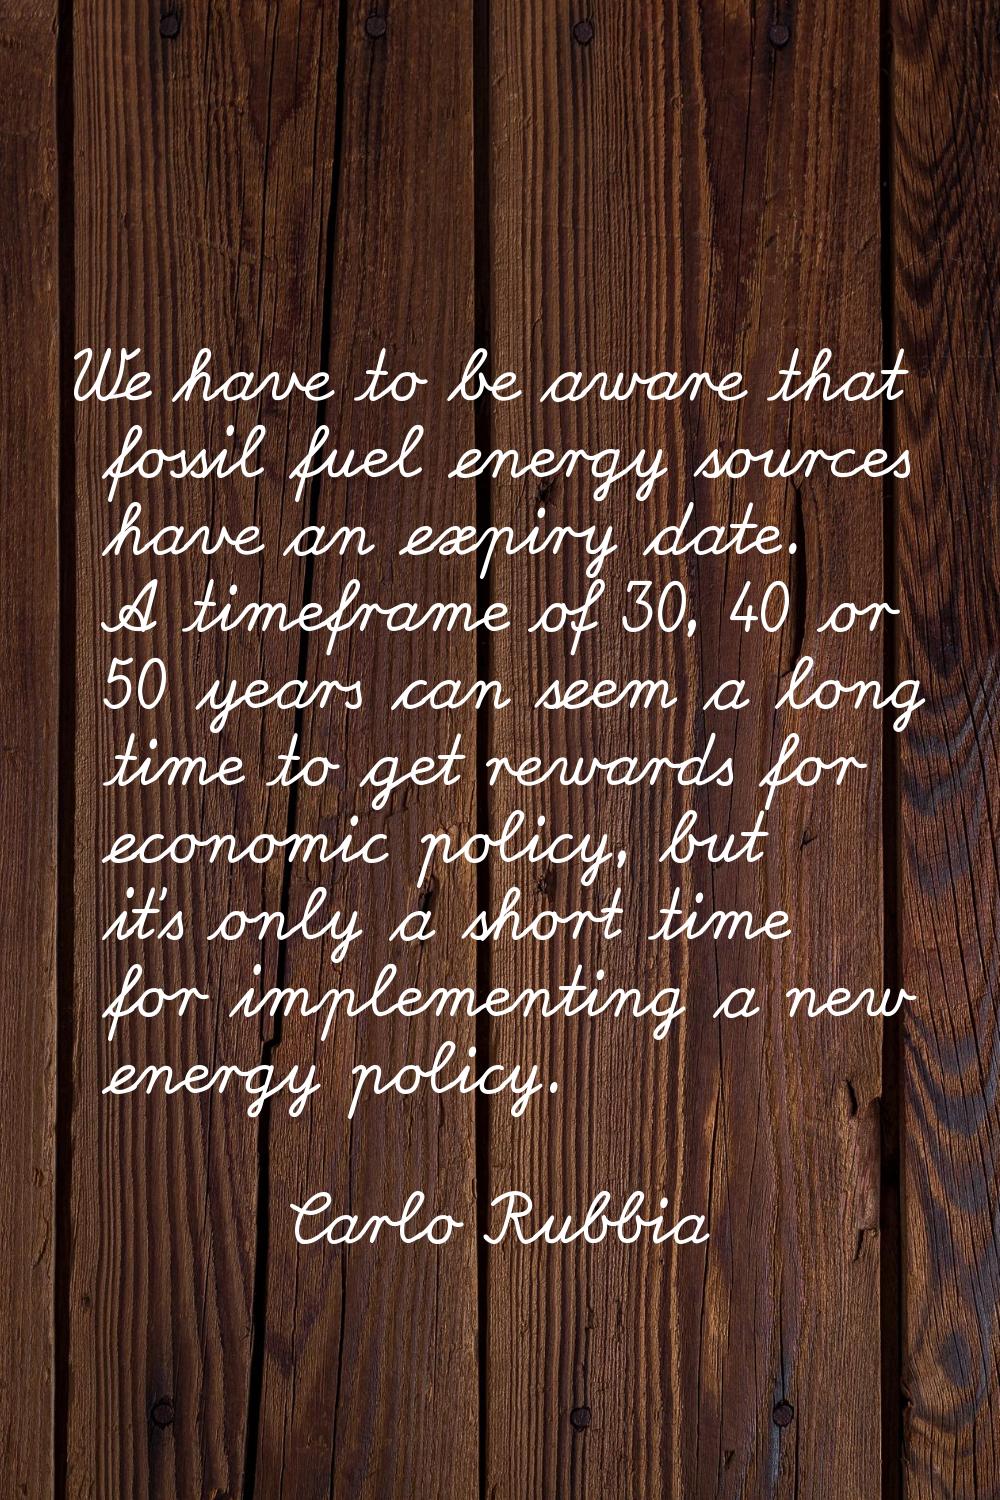 We have to be aware that fossil fuel energy sources have an expiry date. A timeframe of 30, 40 or 5